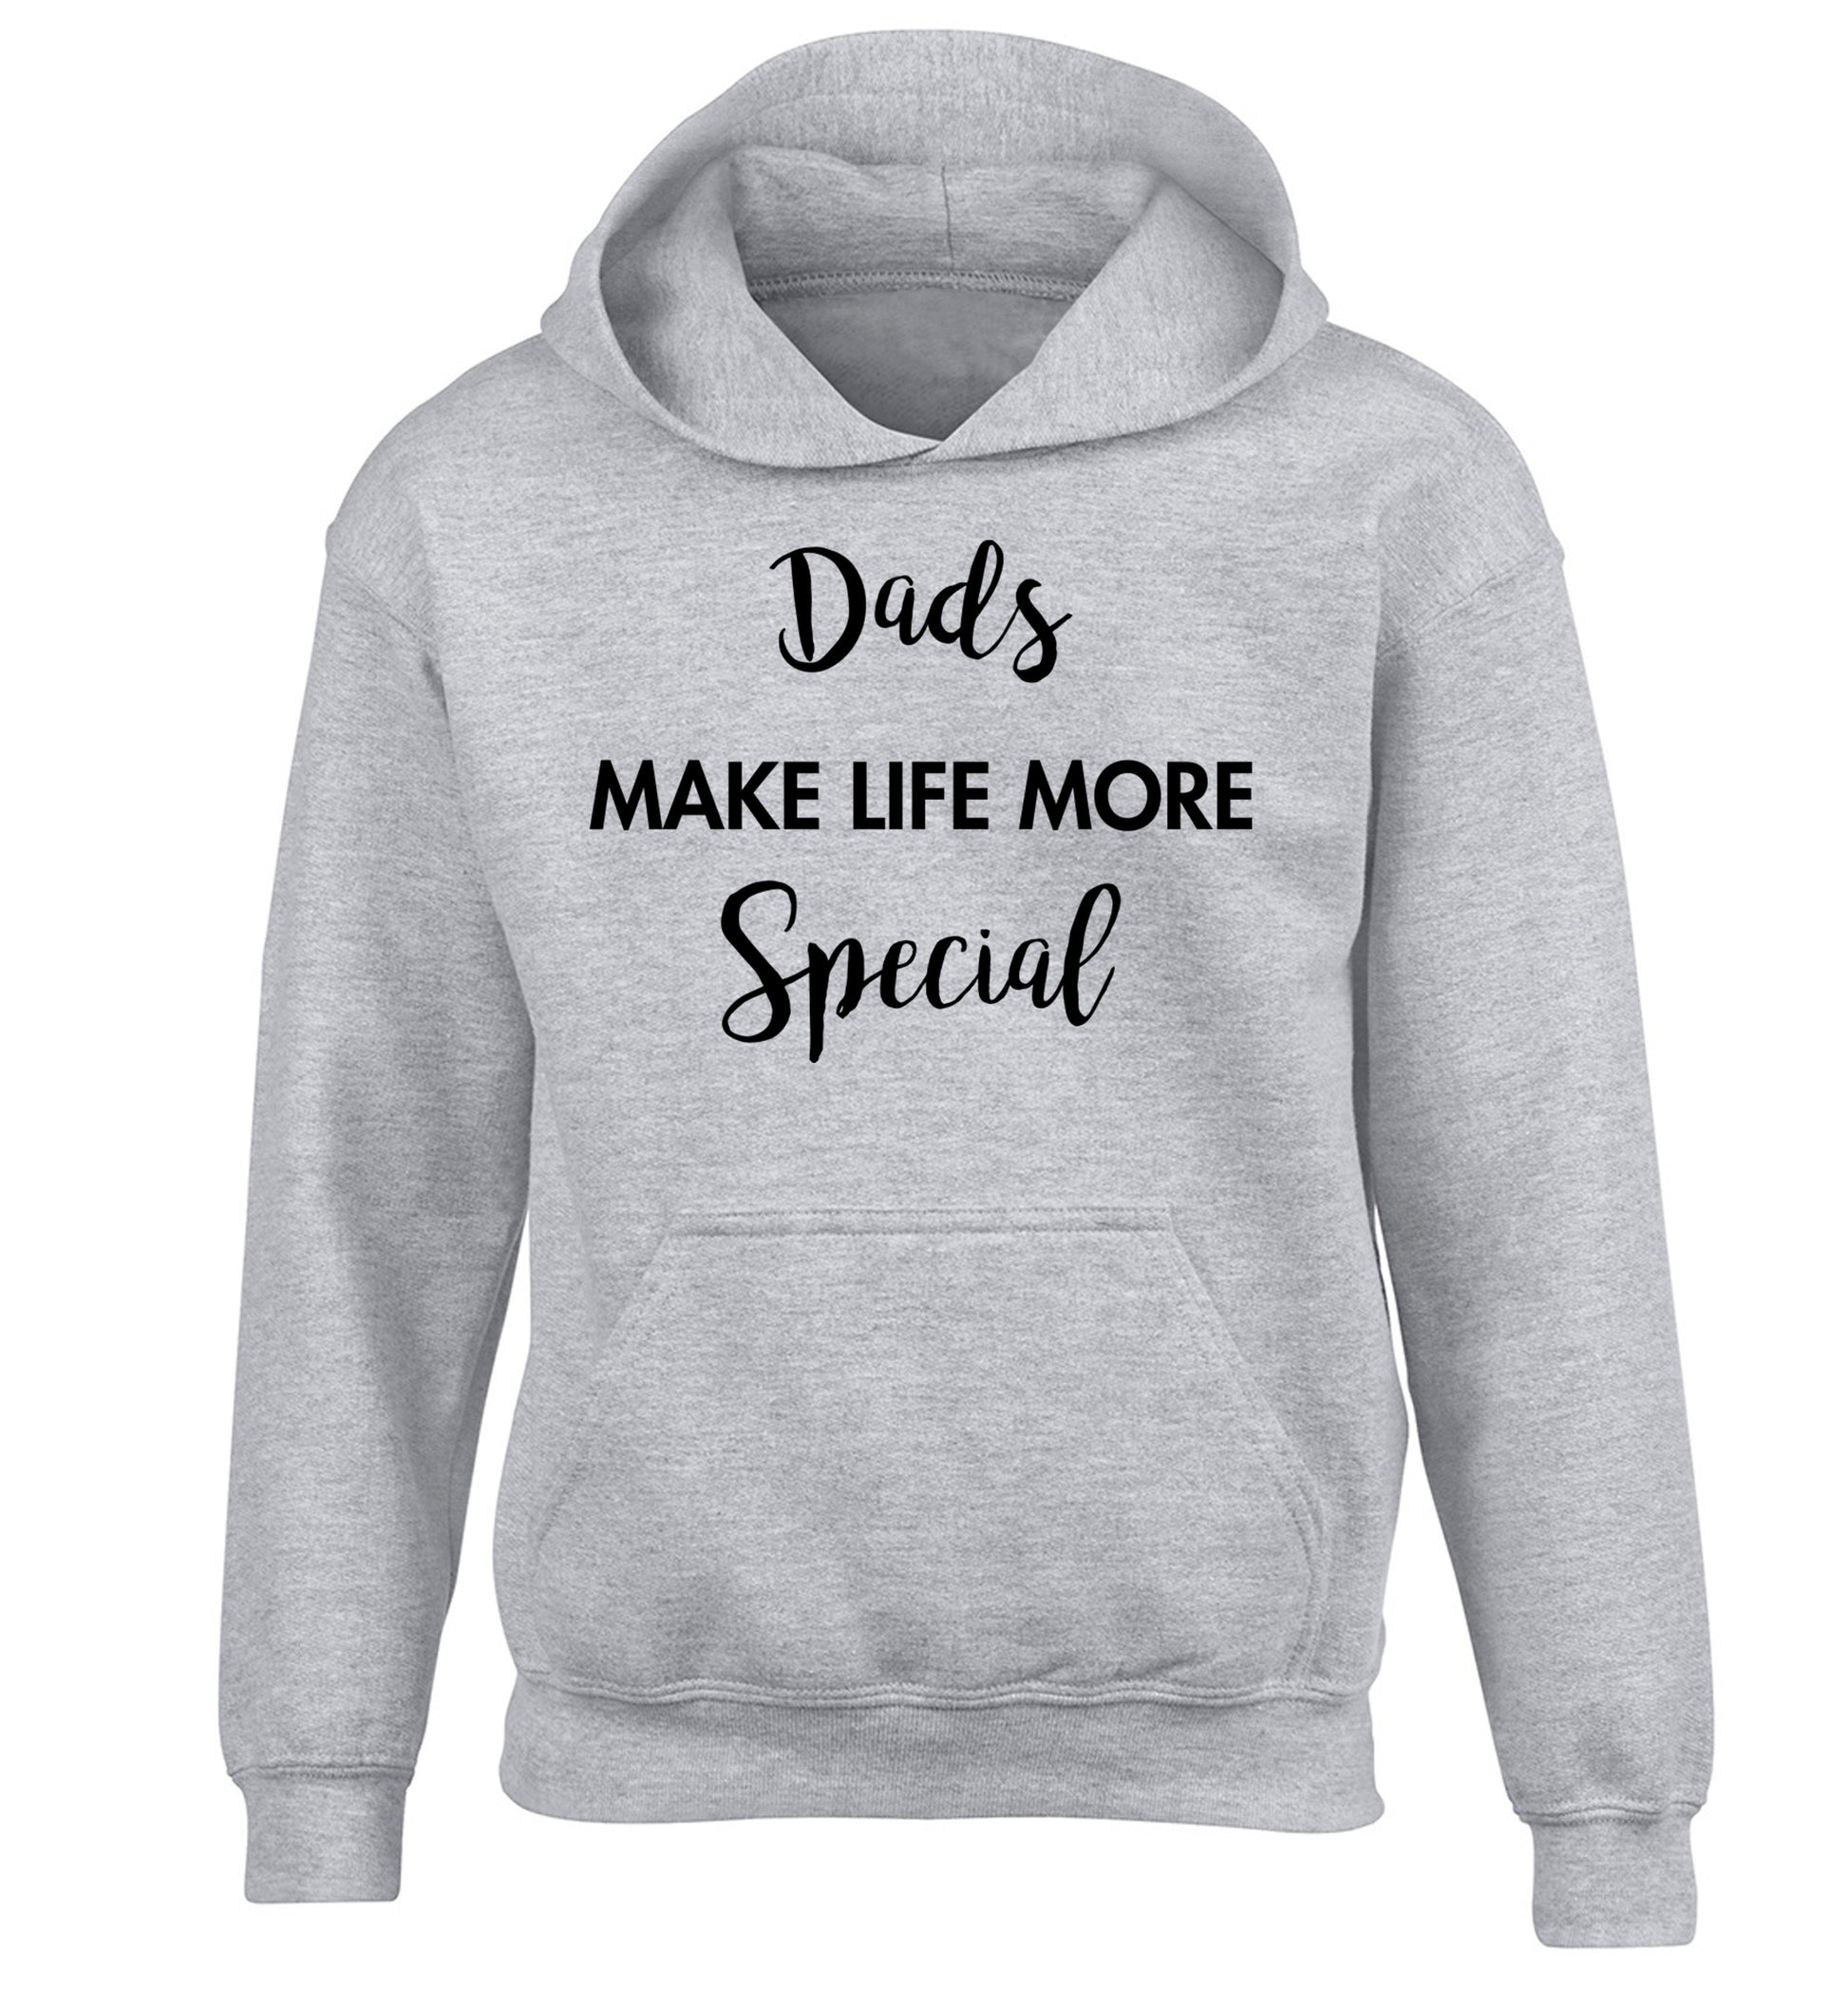 Dads make life more special children's grey hoodie 12-14 Years